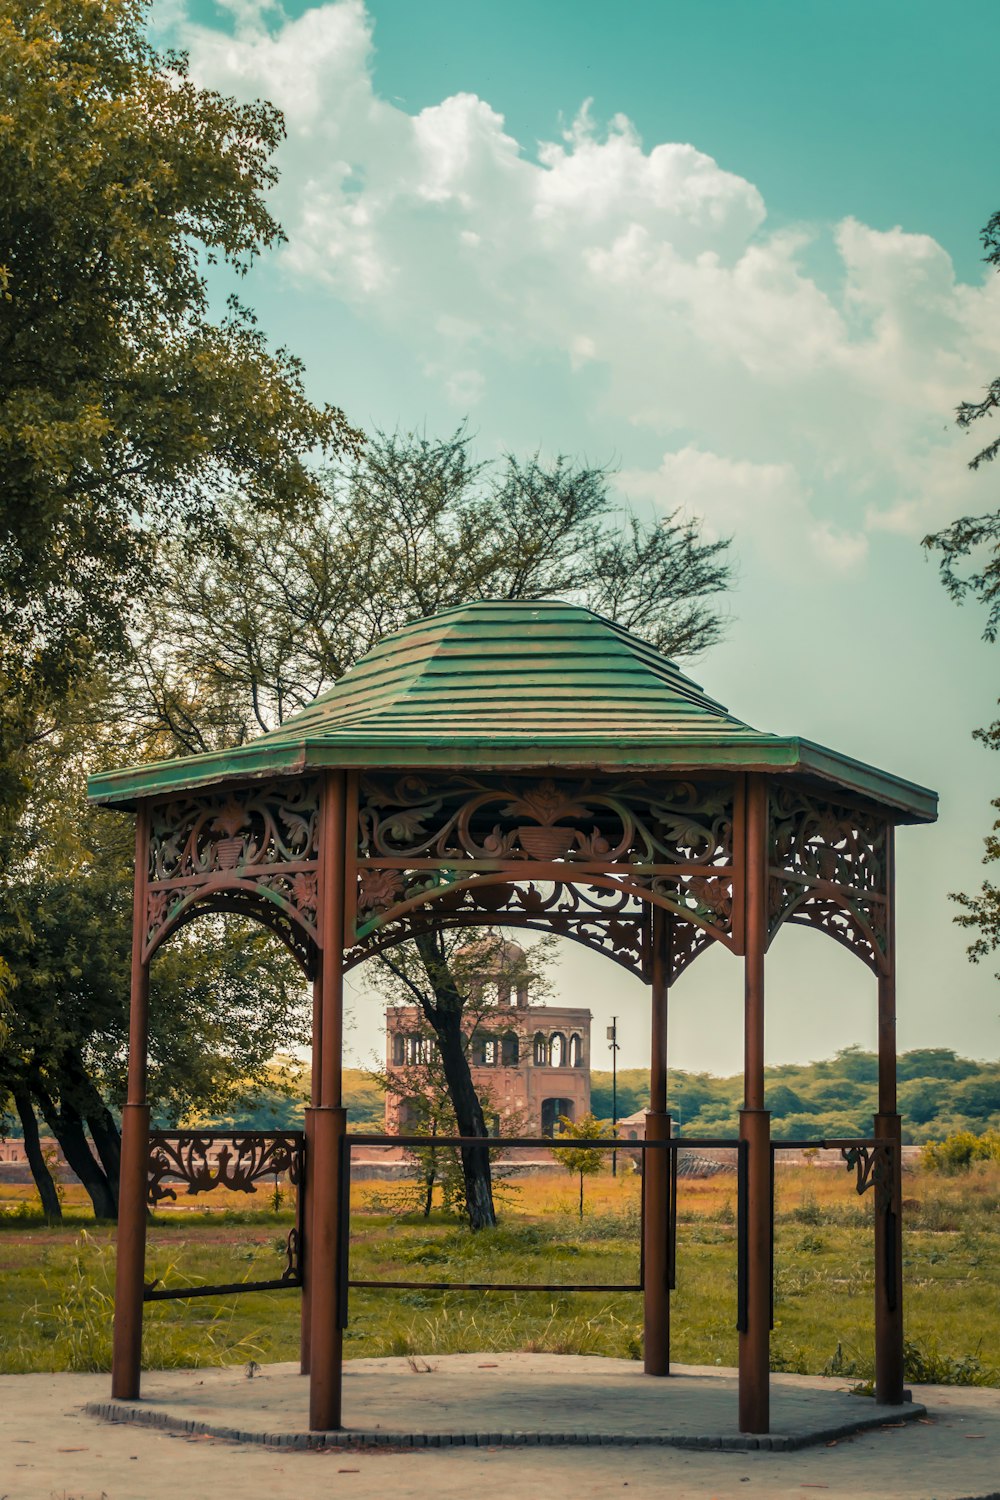 green and brown gazebo surrounded by green trees during daytime